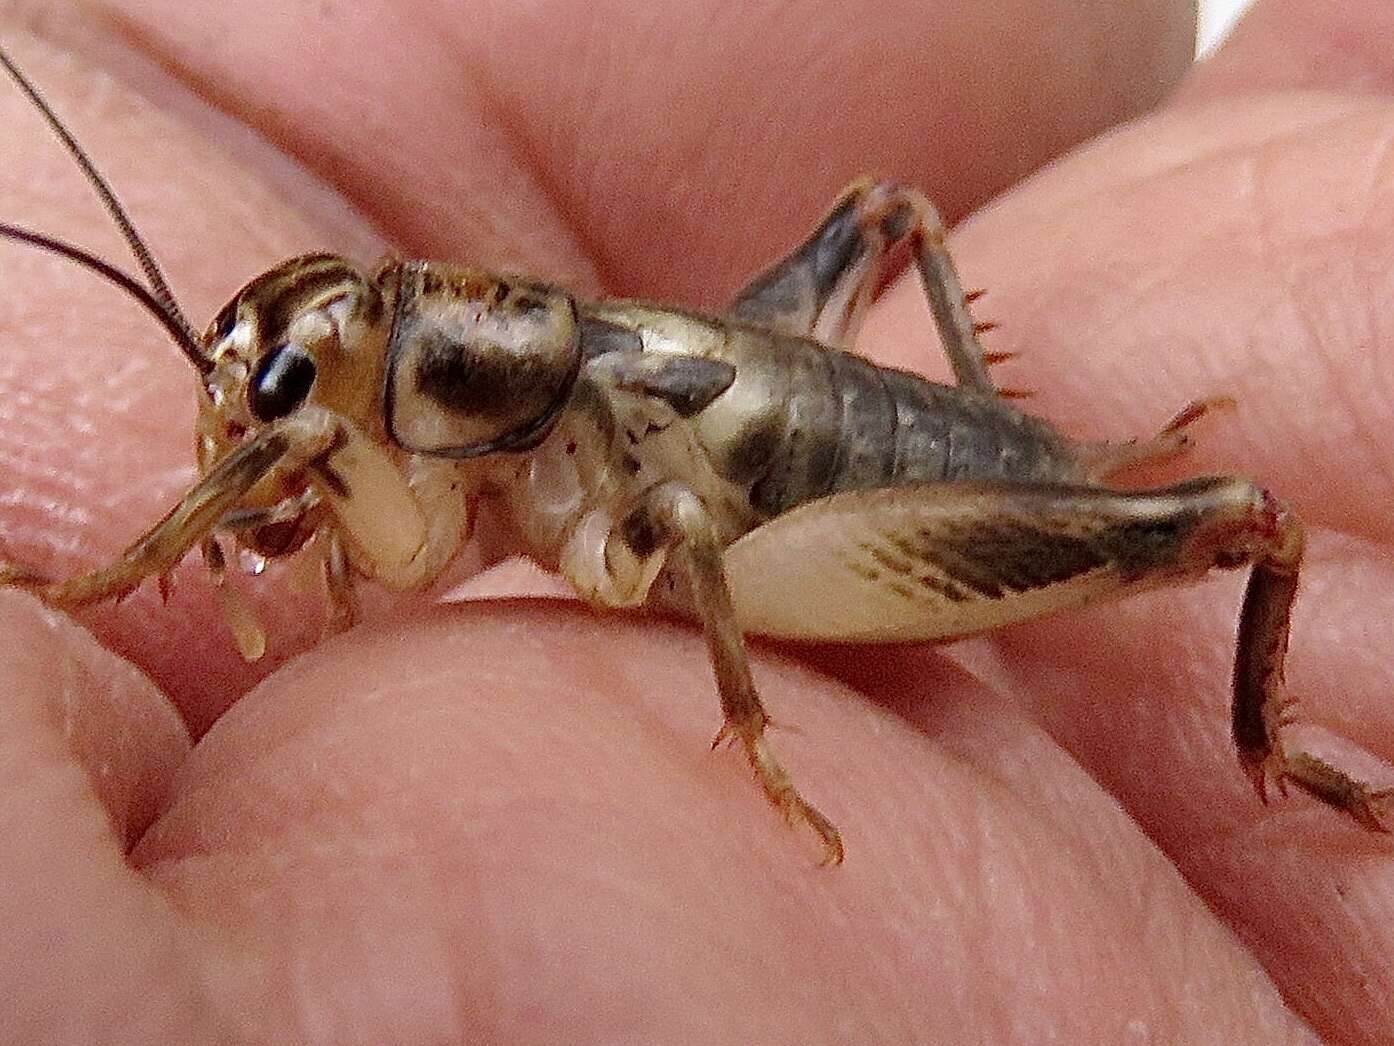 Image of Common Short-tailed Cricket